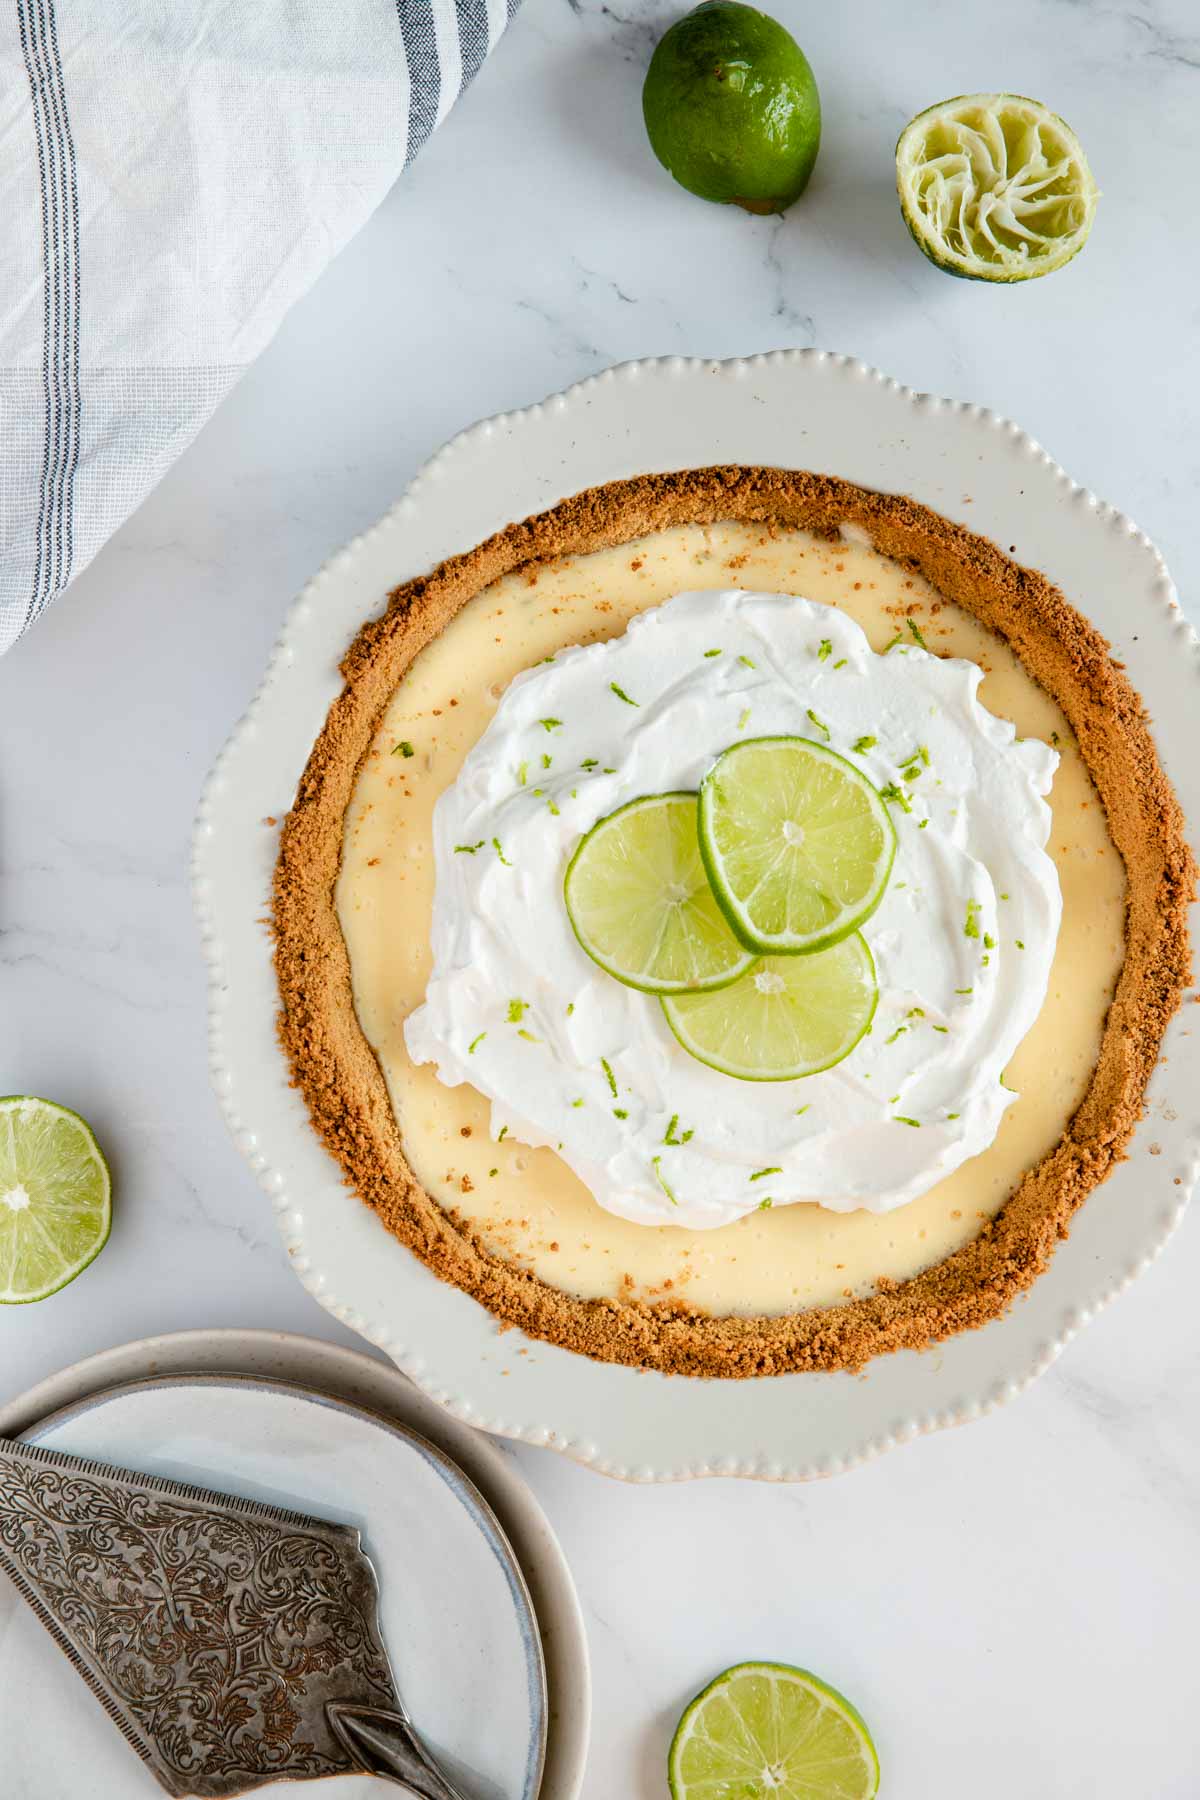 gluten free key lime pie ready to be served, surrounded by limes and serving dishes.